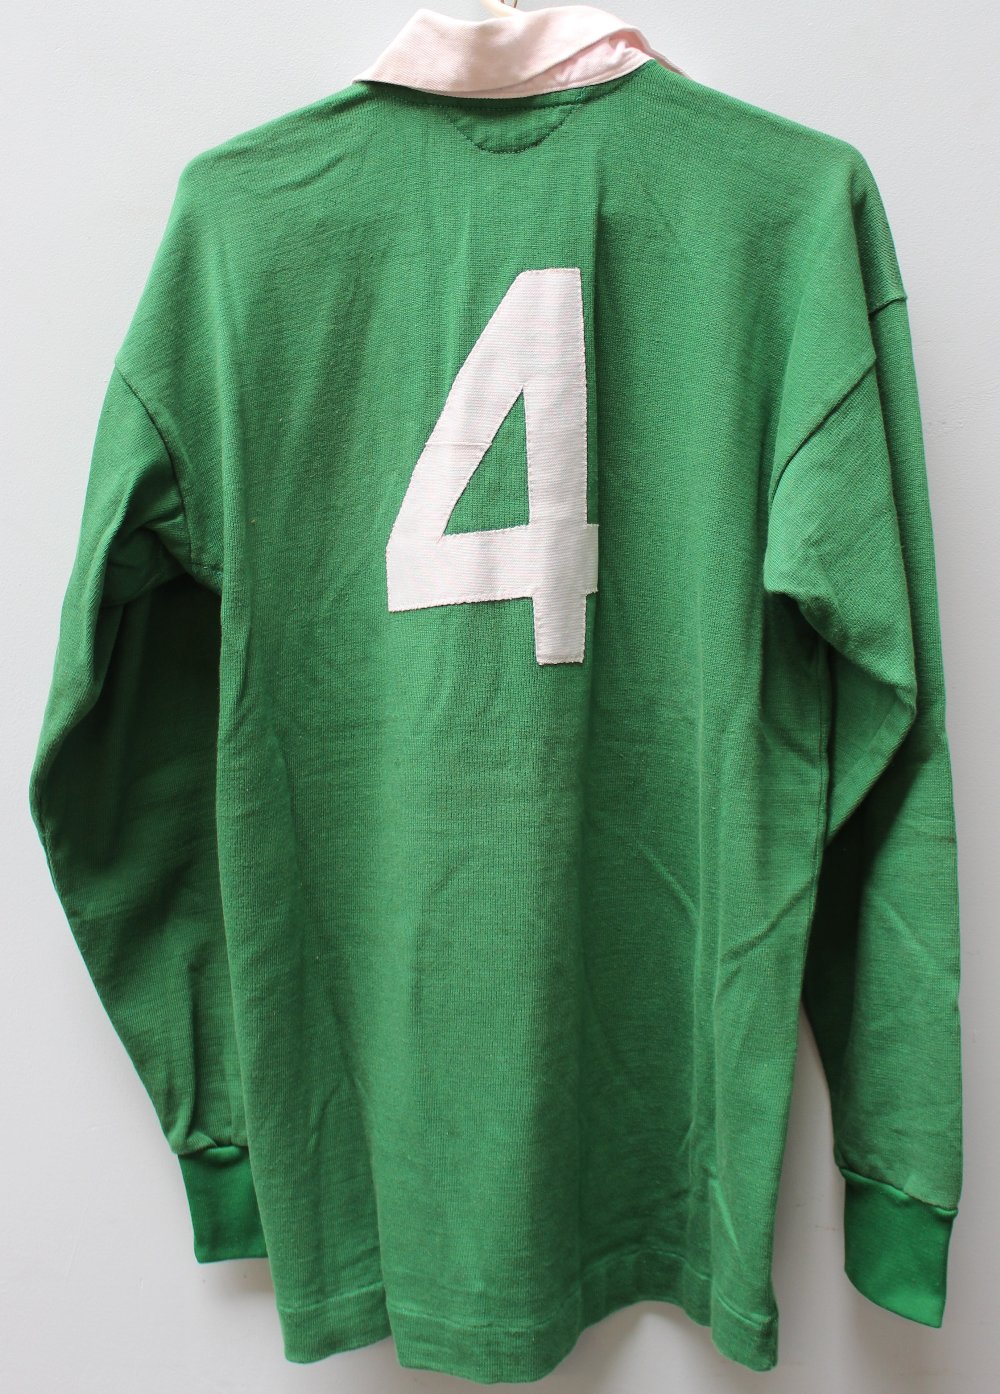 Allan Martin - An Irish International match worn jersey, embroidered with a shamrock and the No. - Image 3 of 3